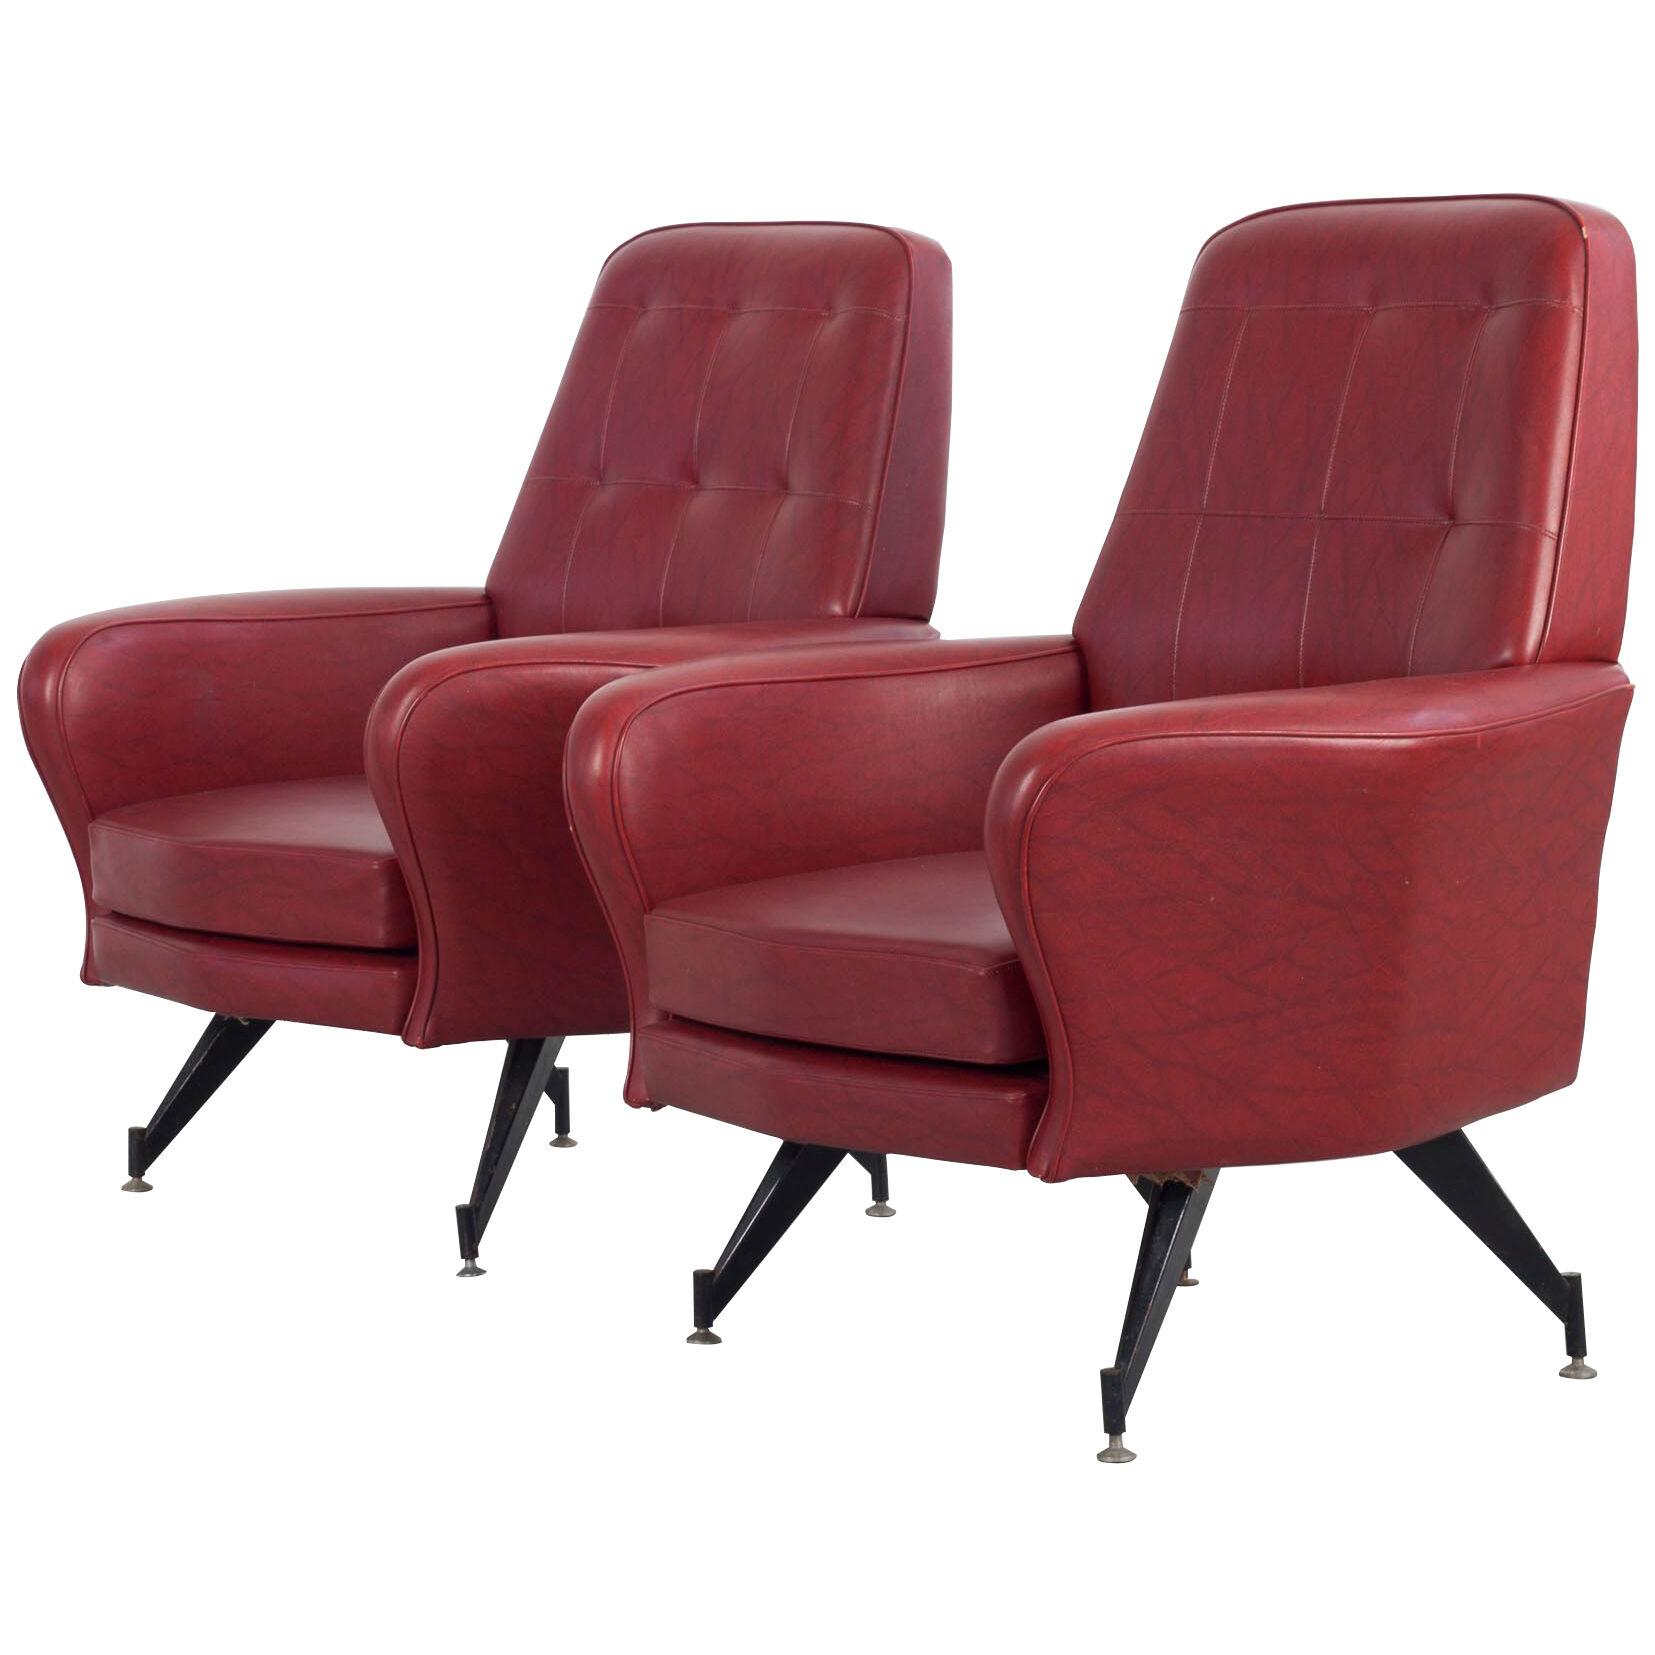 Set of 2 Red Leatherette Armchairs in original Condition, Italy 1950s